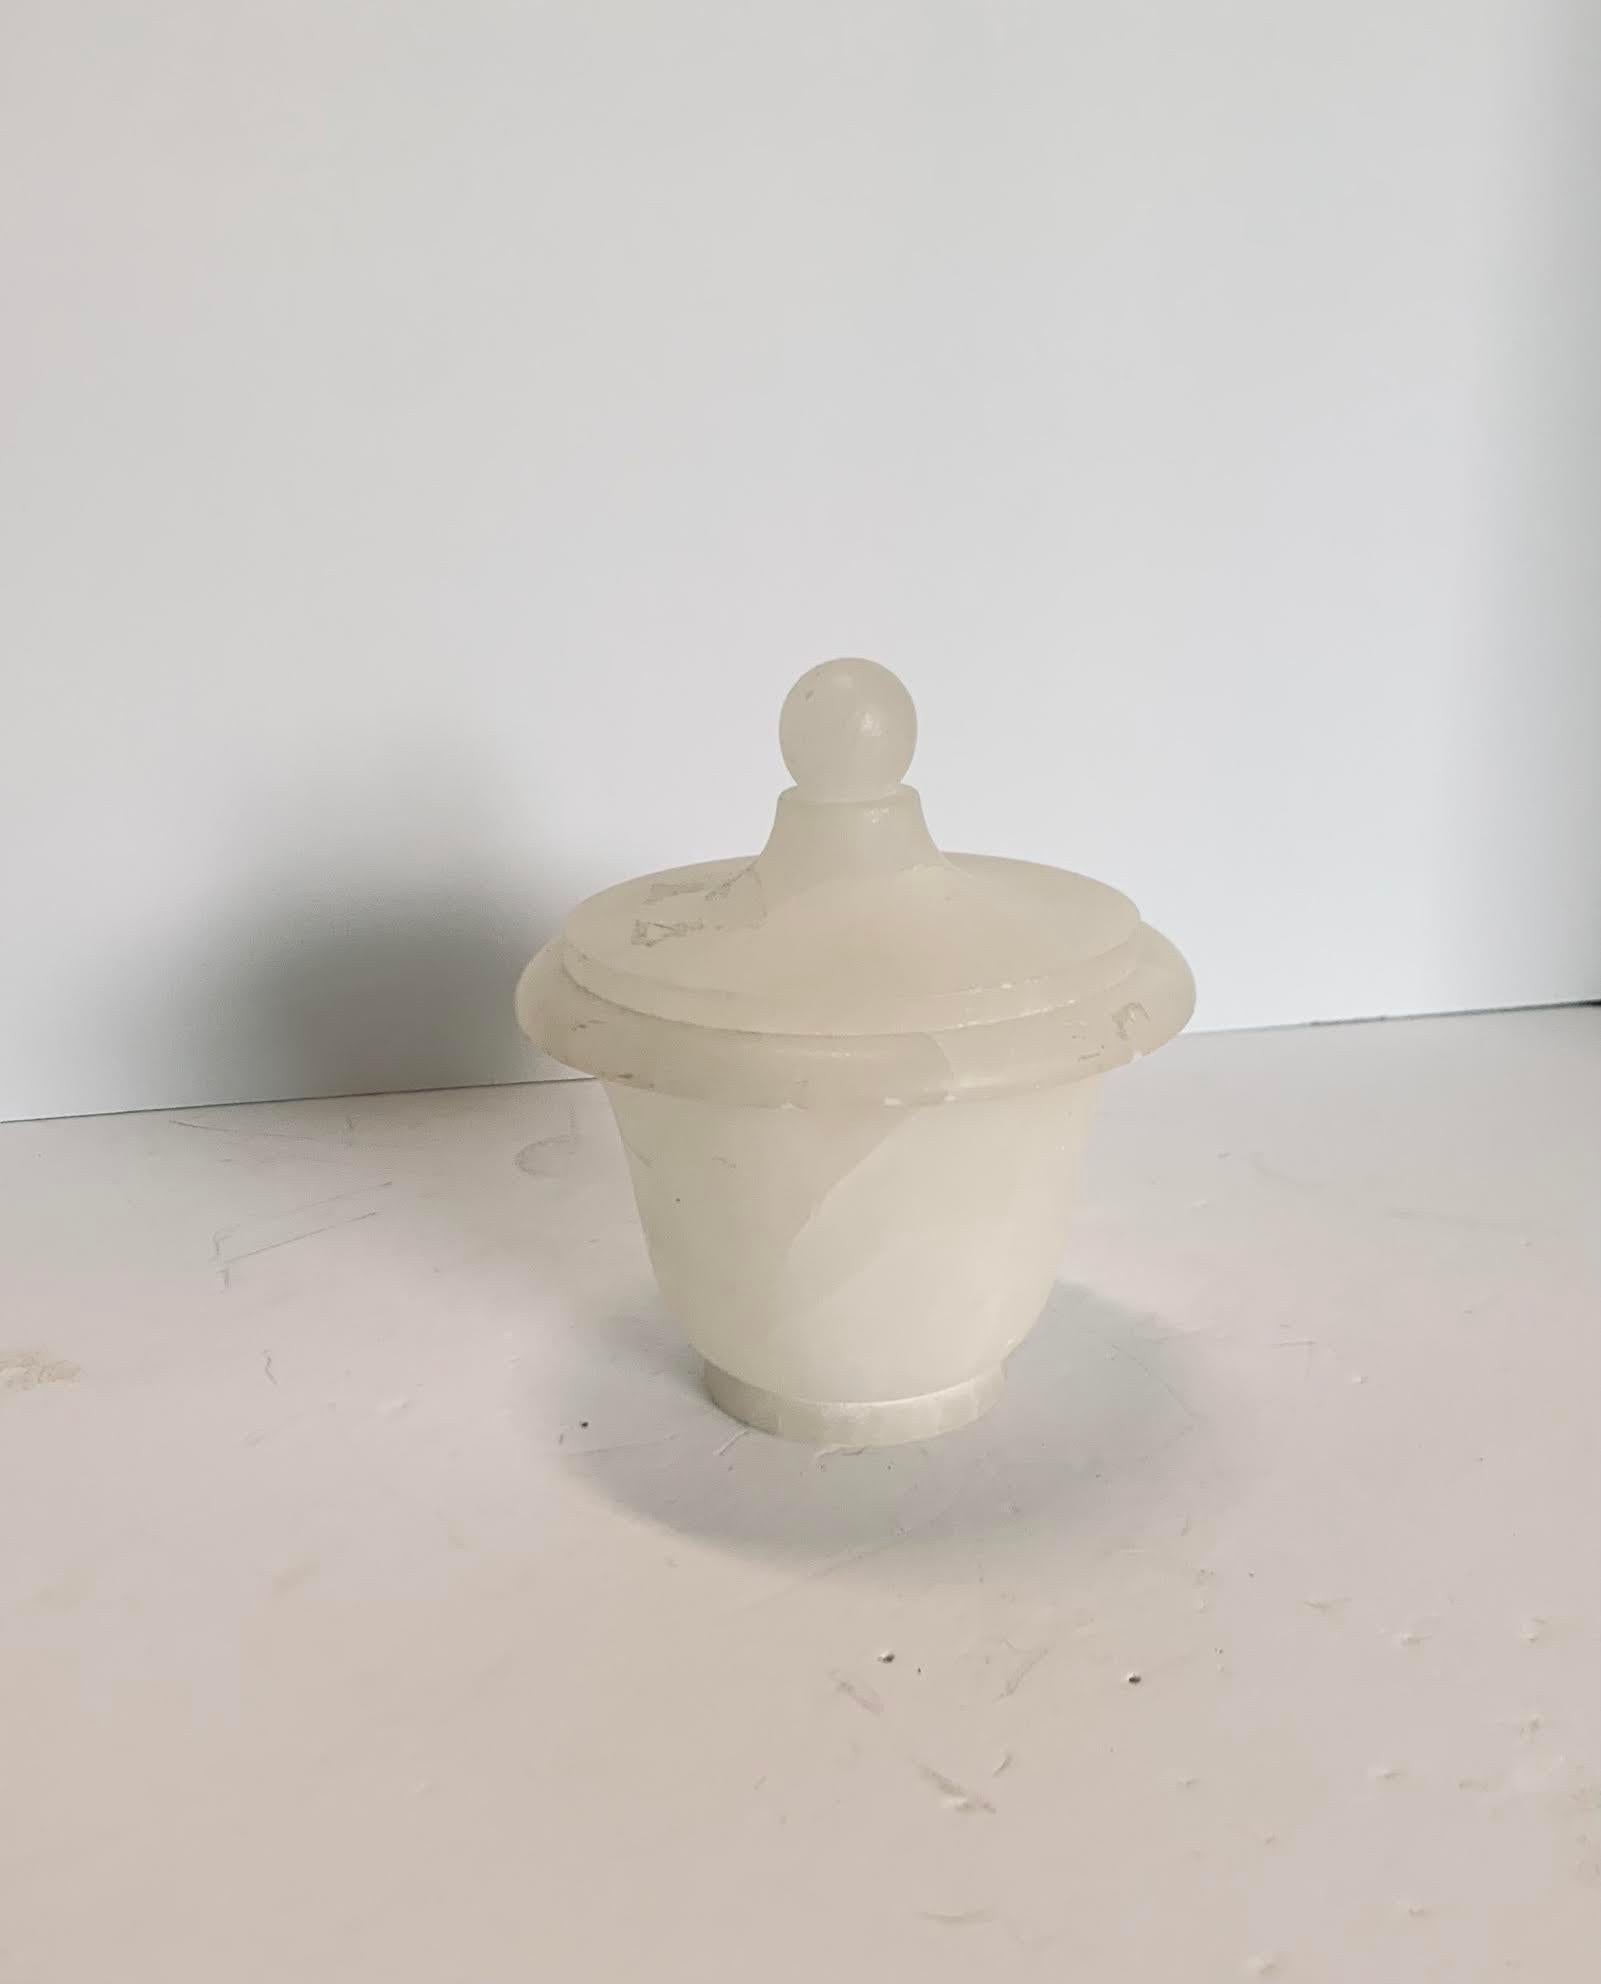 Mid century Italian lidded alabaster jar.
Can be combined with others to make a gradated set.
(S5877 thru S5882).